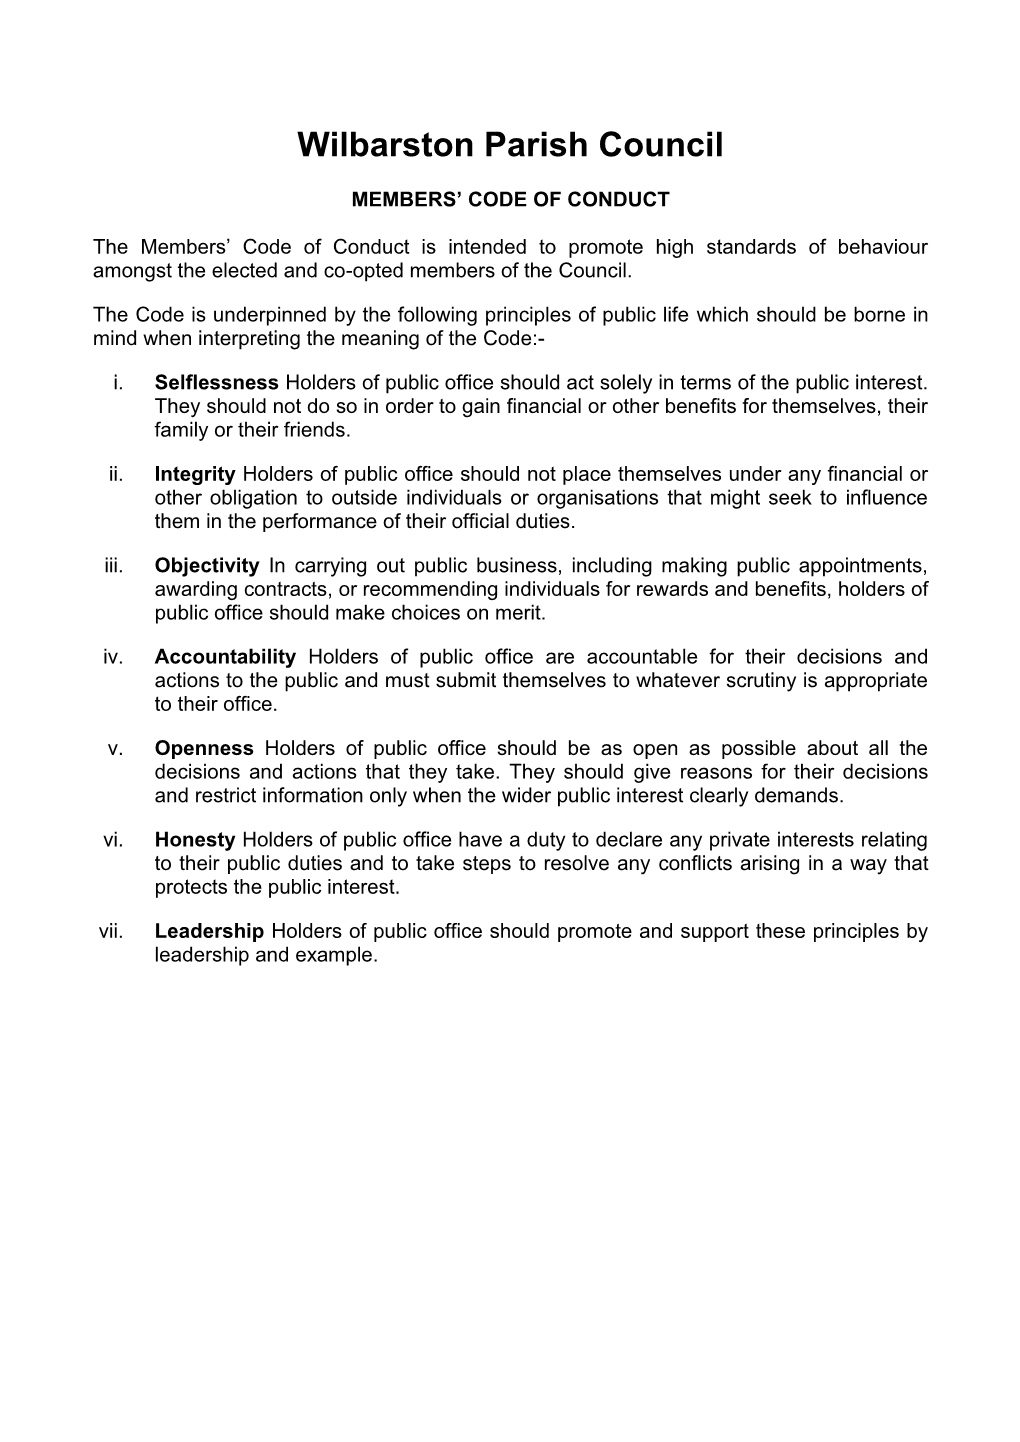 Code of Conduct of Cambridgeshire County